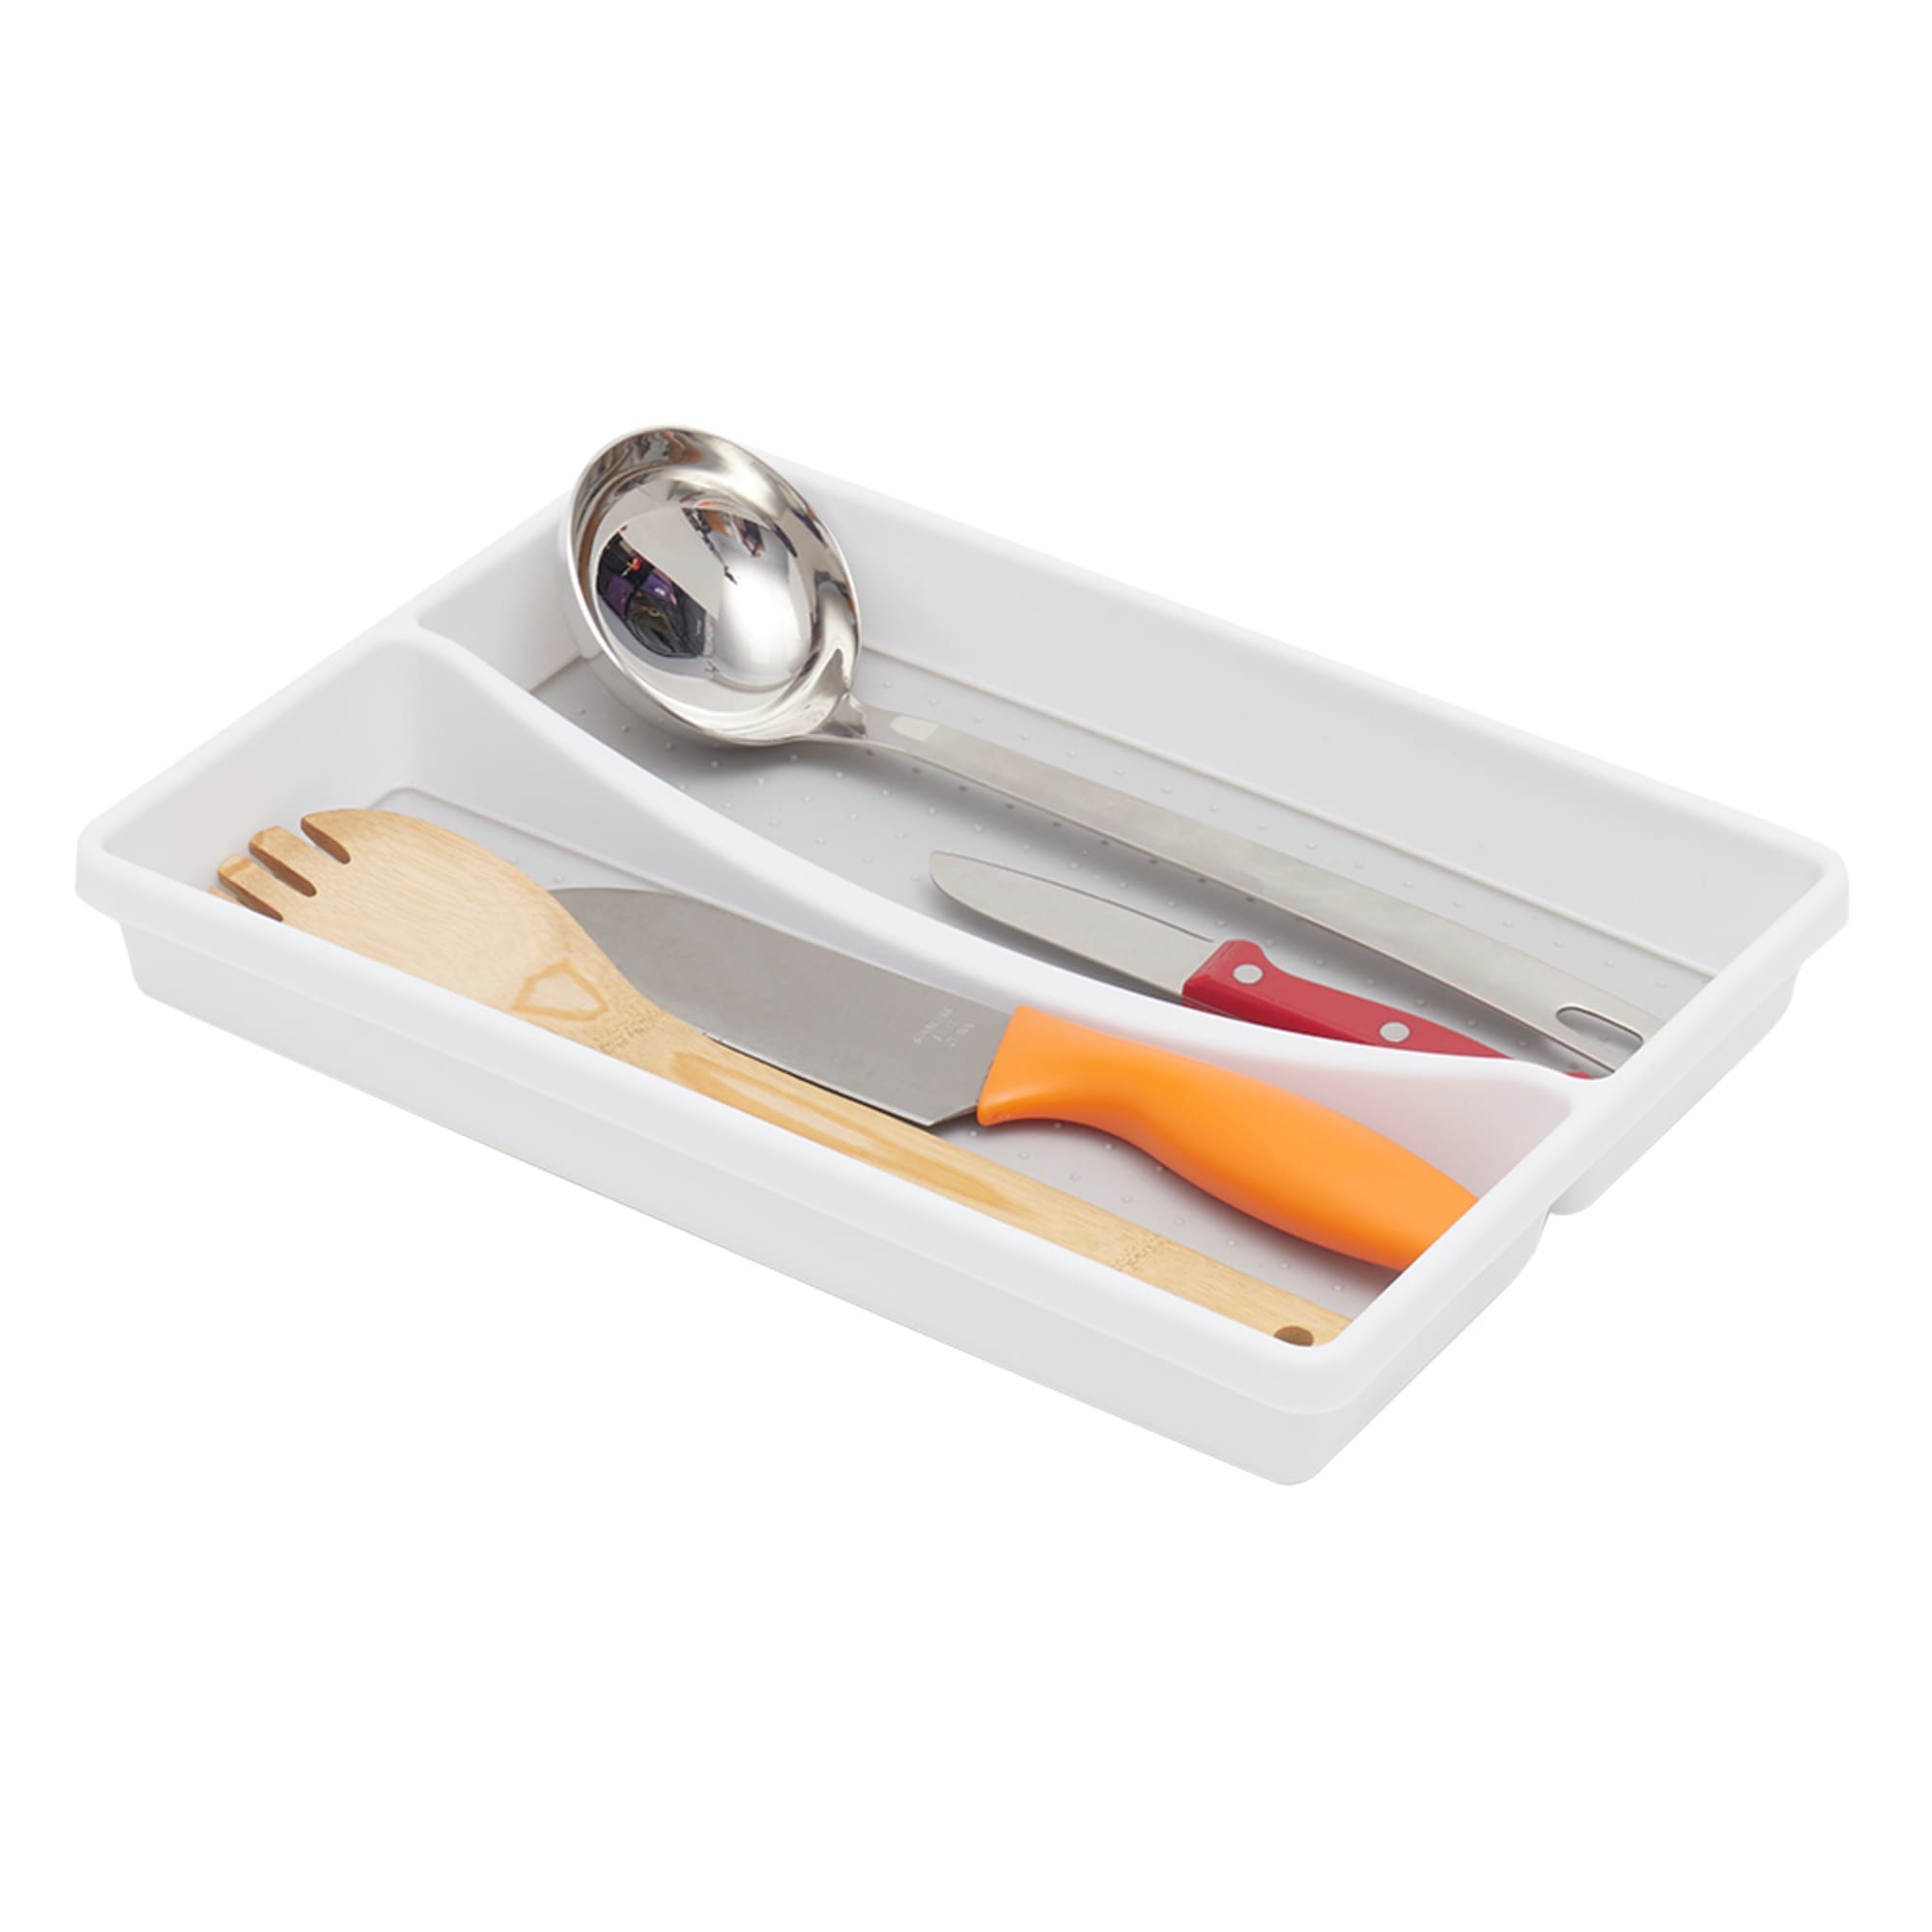 Home Basics 2 Compartment Rubber Lined Plastic Utensil Tray, White $3.00 EACH, CASE PACK OF 12